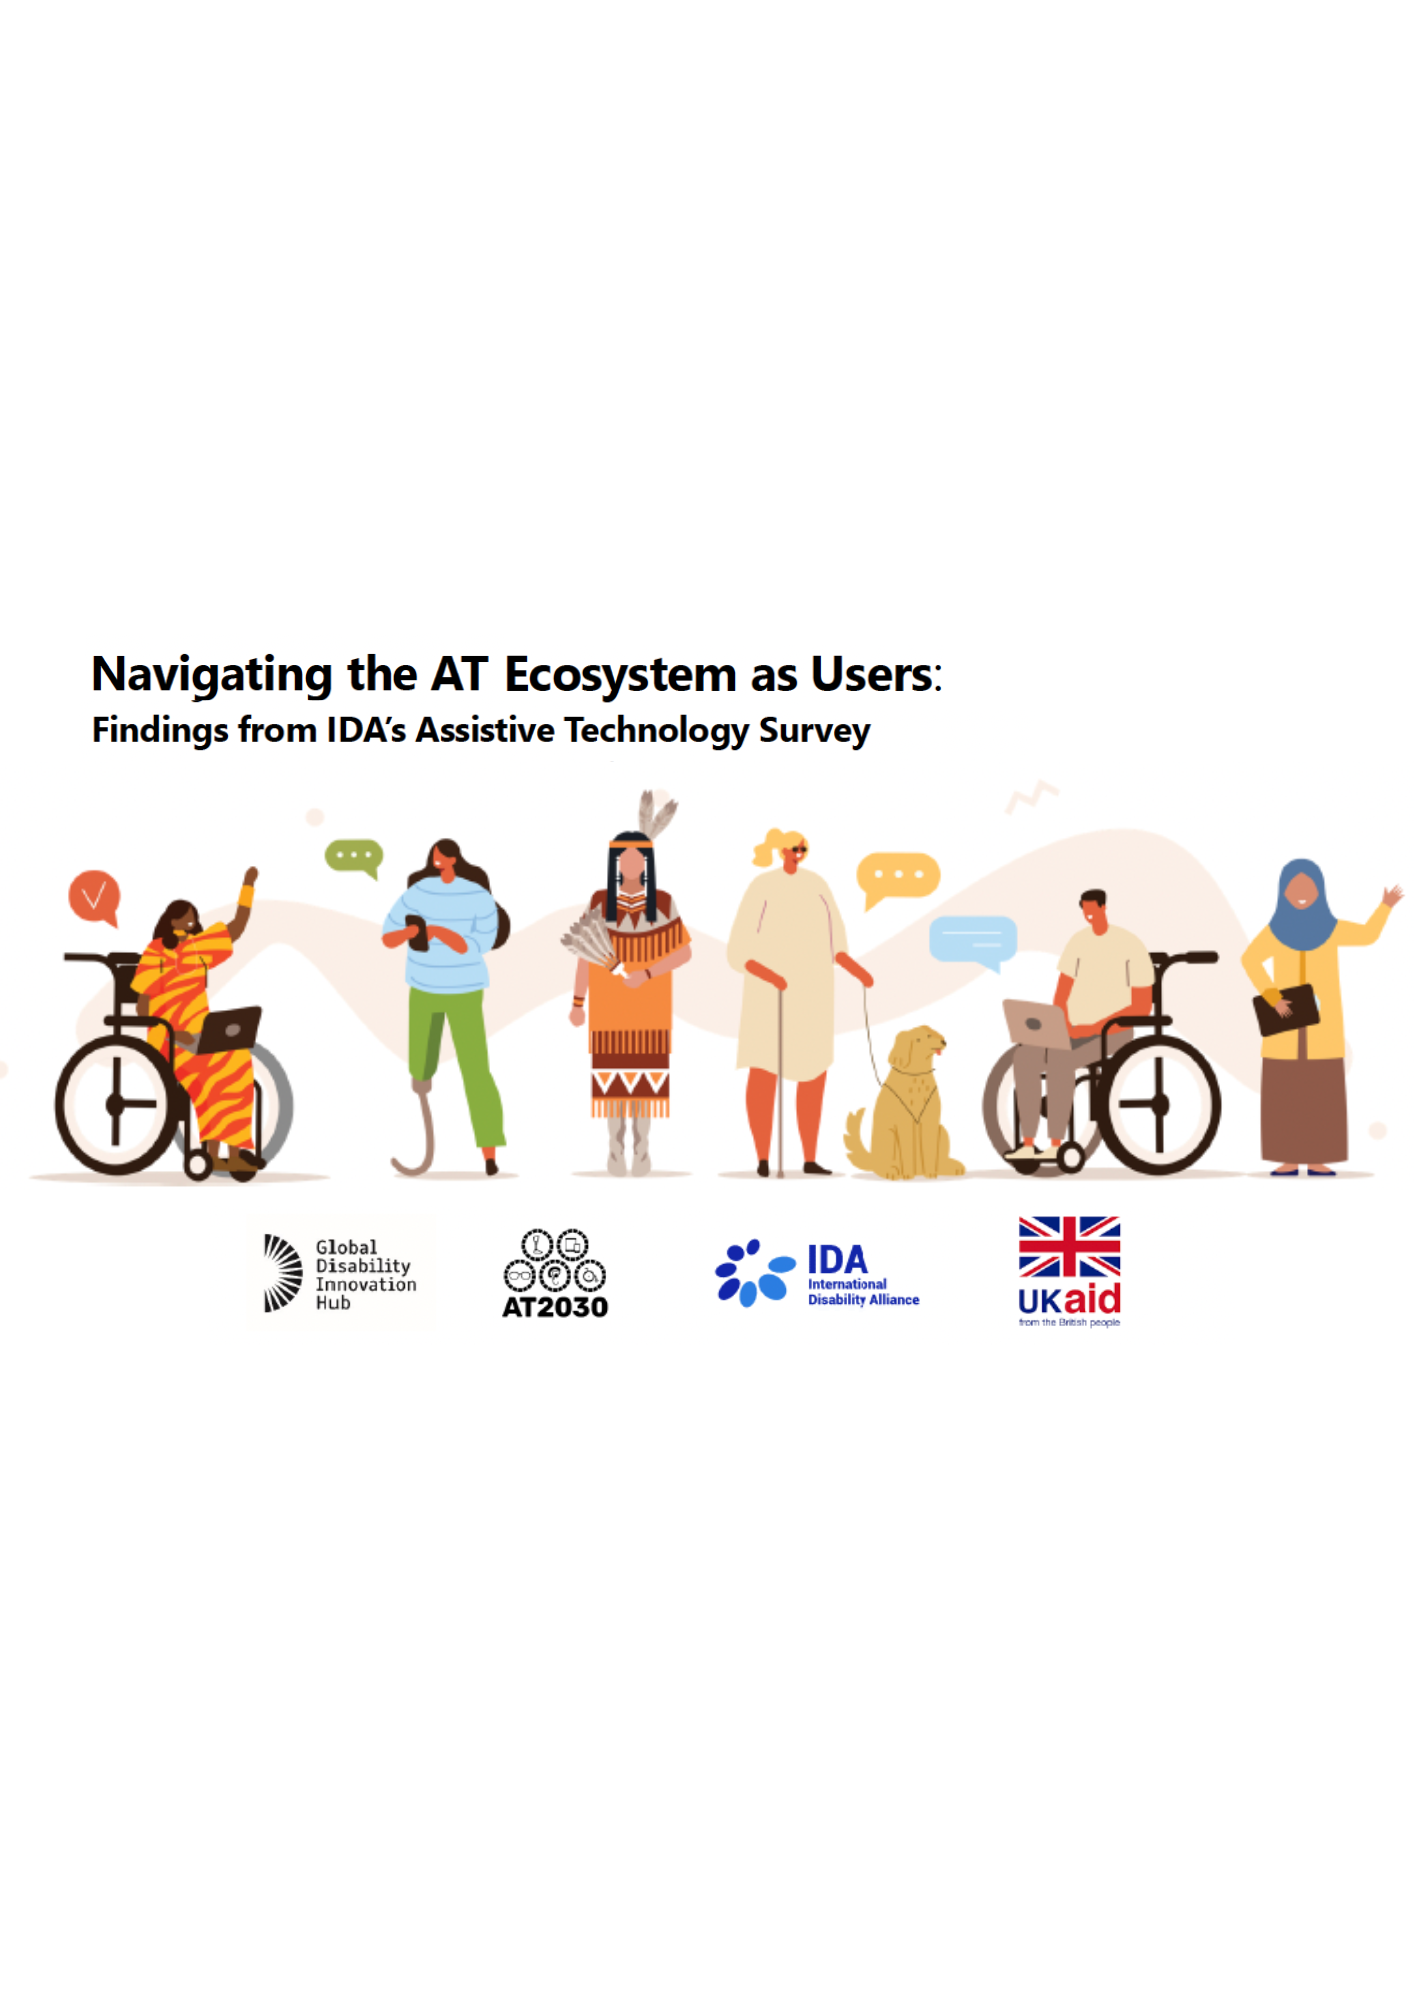 Navigating the AT Ecosystem as Users: Findings from IDA’s Assistive Technology Survey